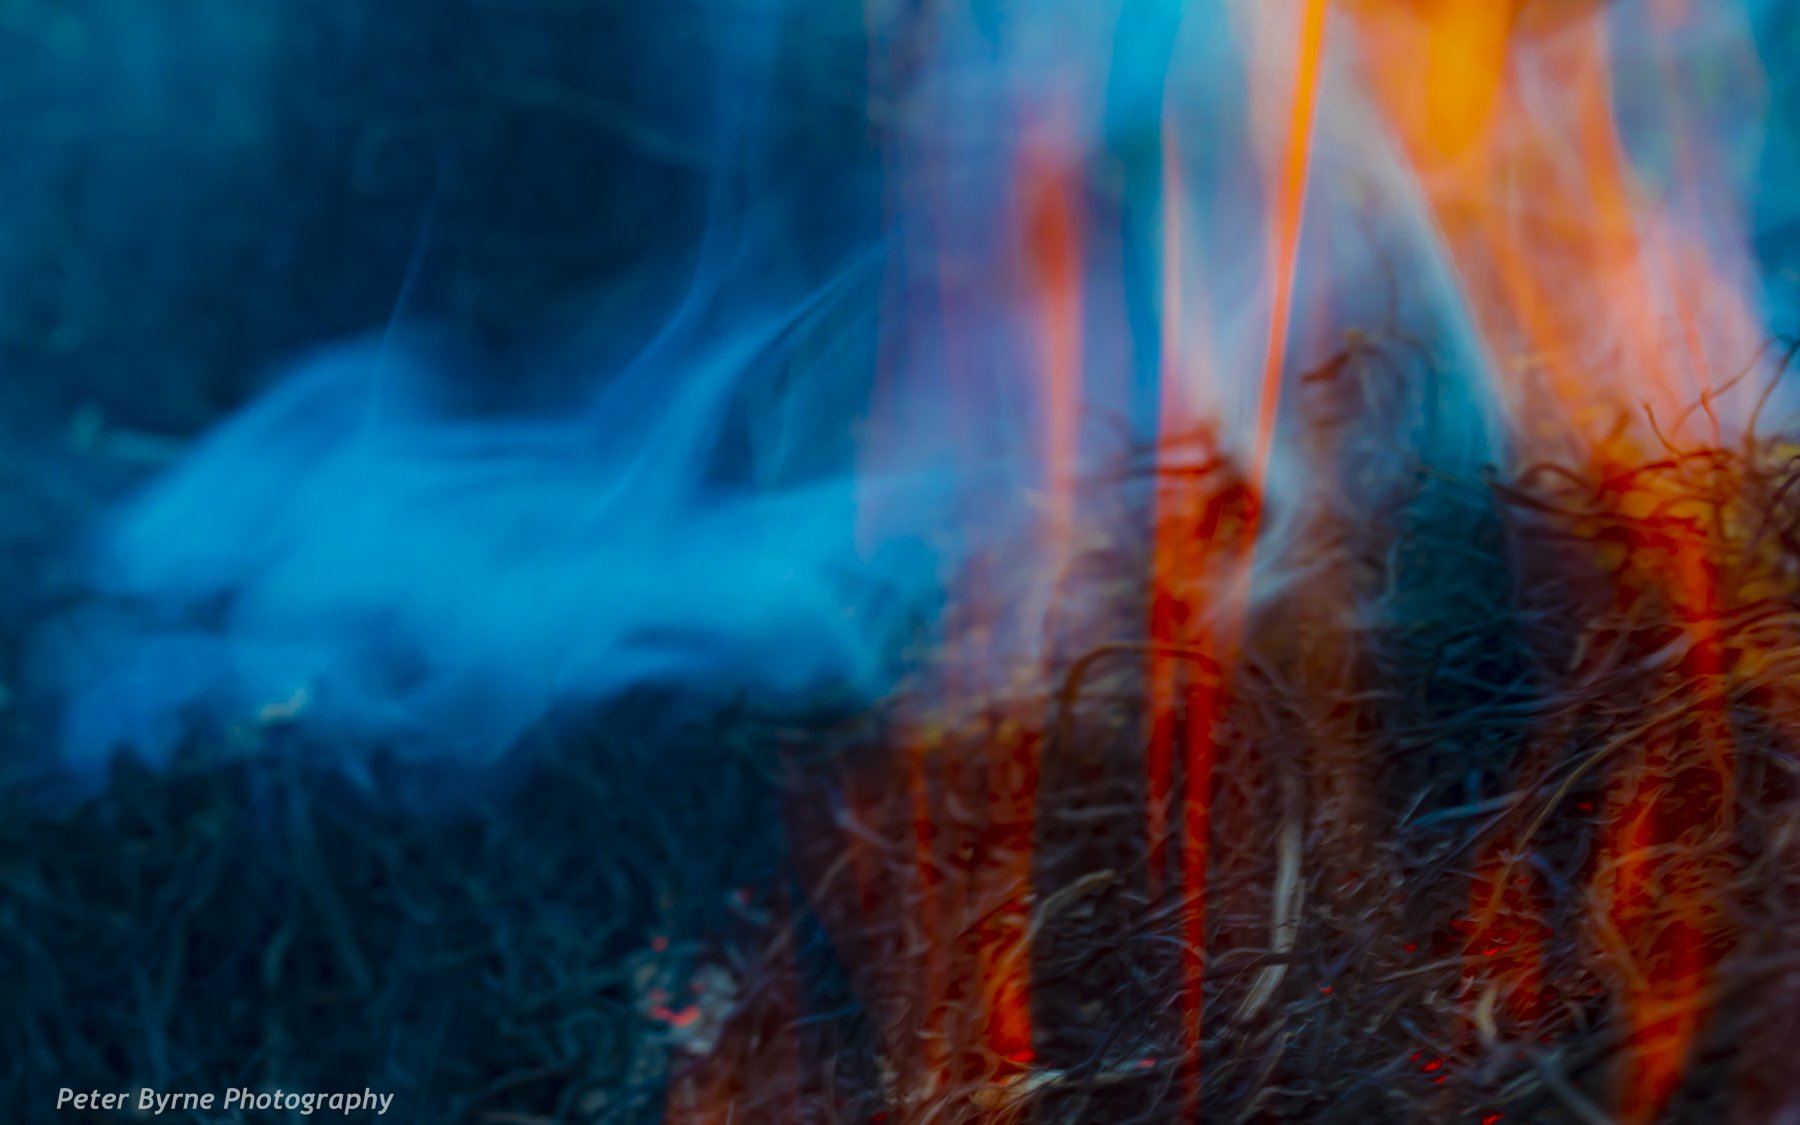 The exploration of fire and a changing environment through a macro lens